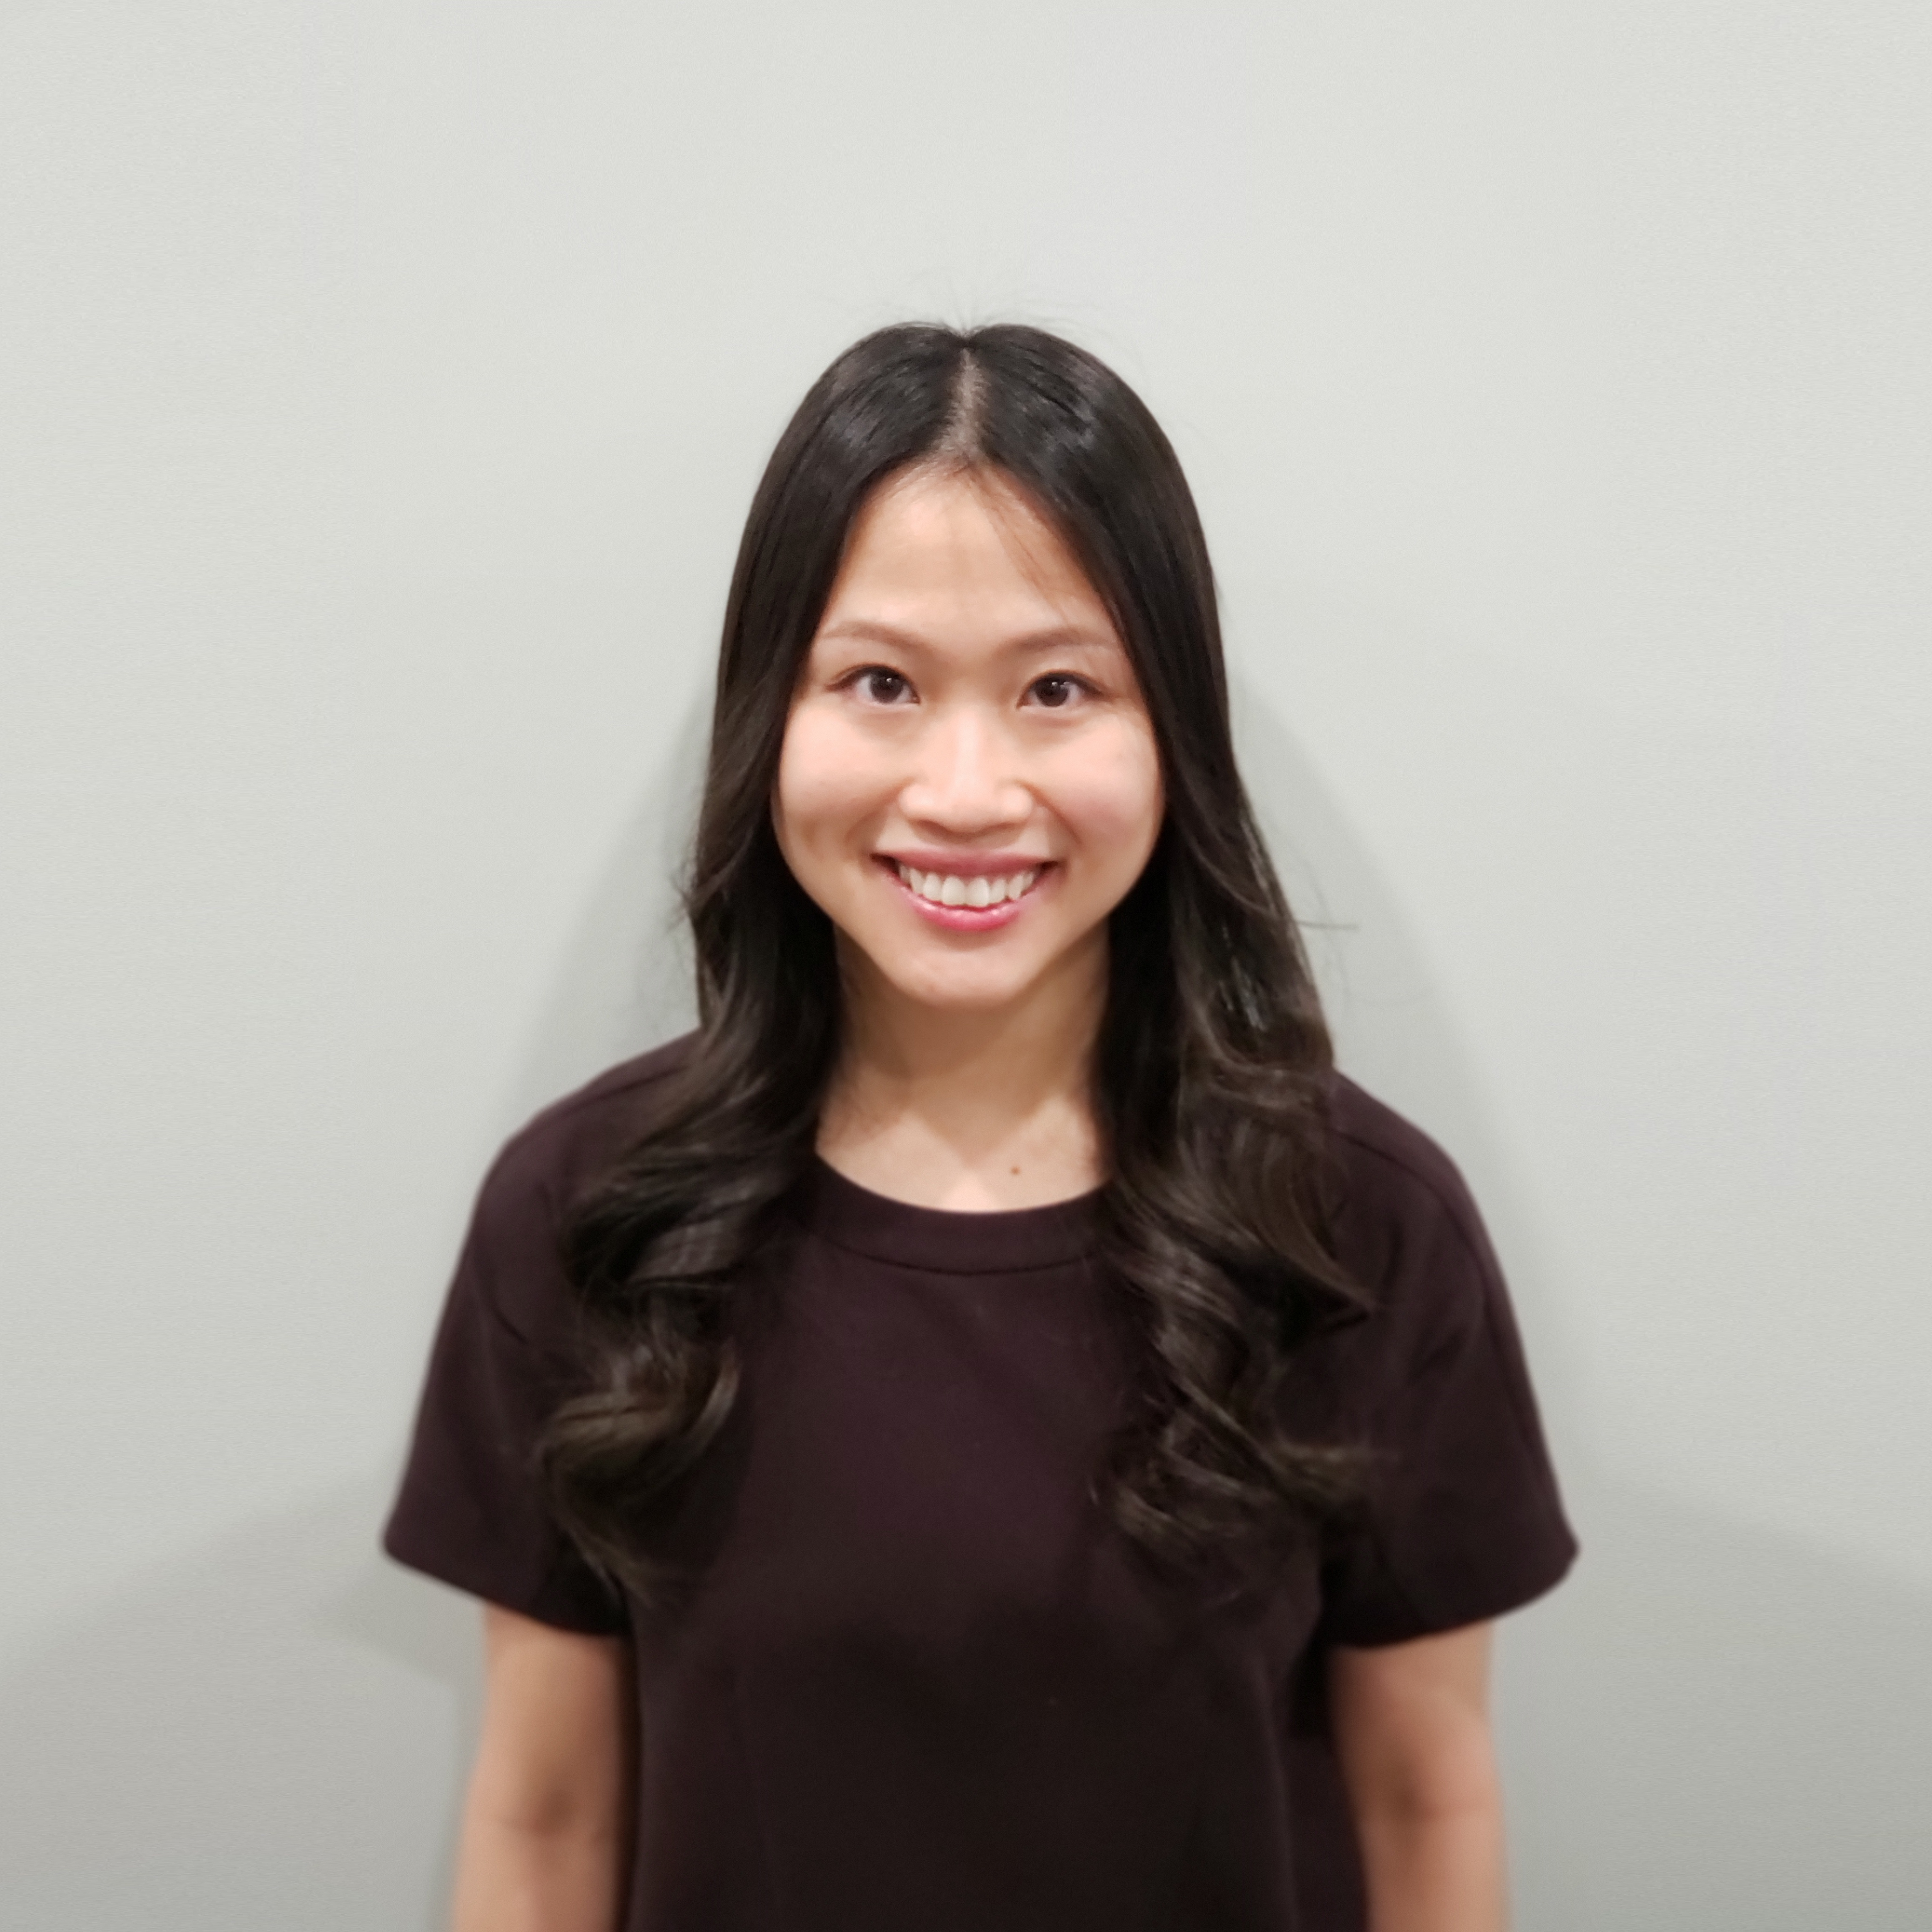 Dr. Kelly Tsui, Chiropractor, Registered Massage Therapist, Acupuncture & Orthotics Provider